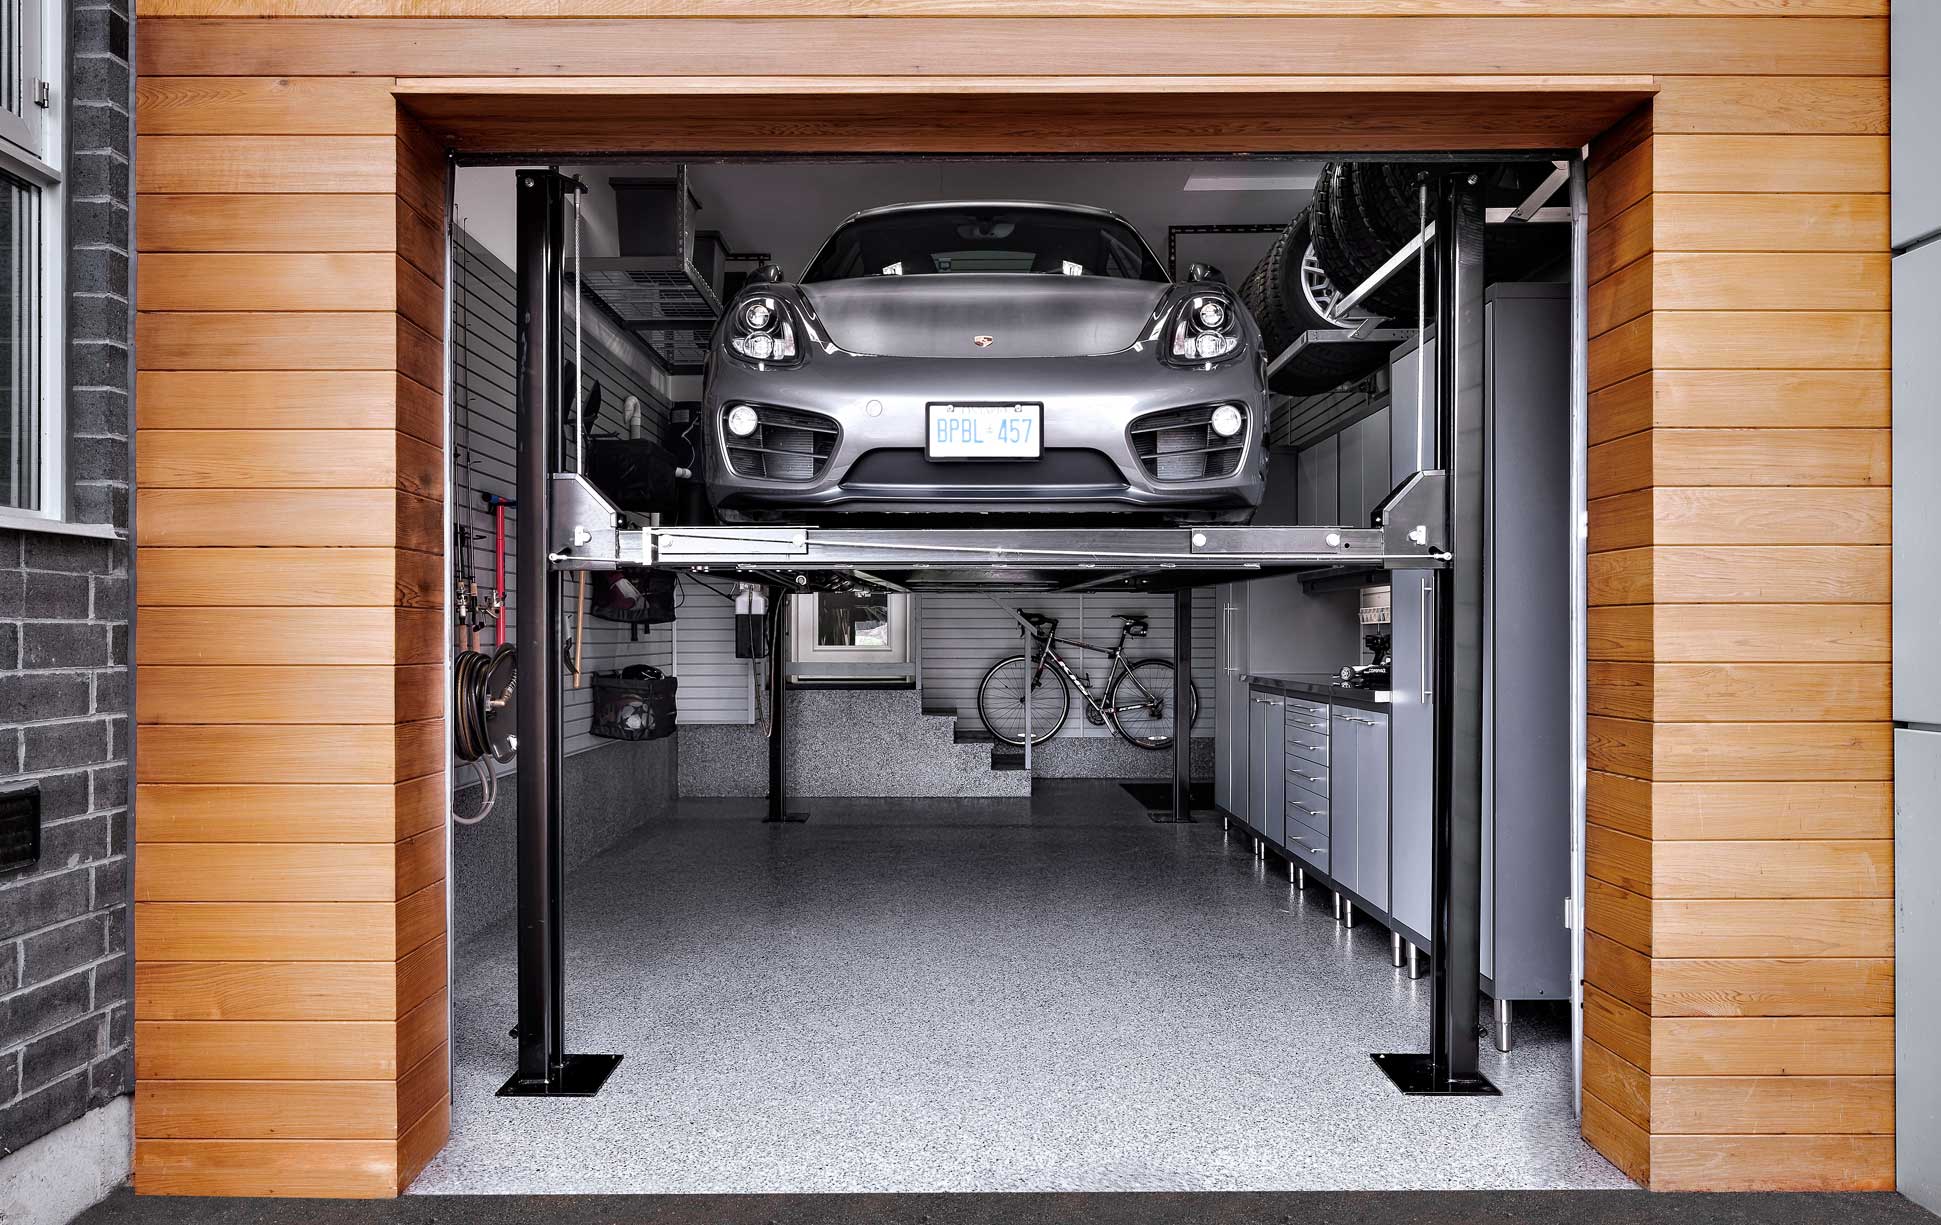 How Do I Know If a Car Lift Is Right for My Garage?